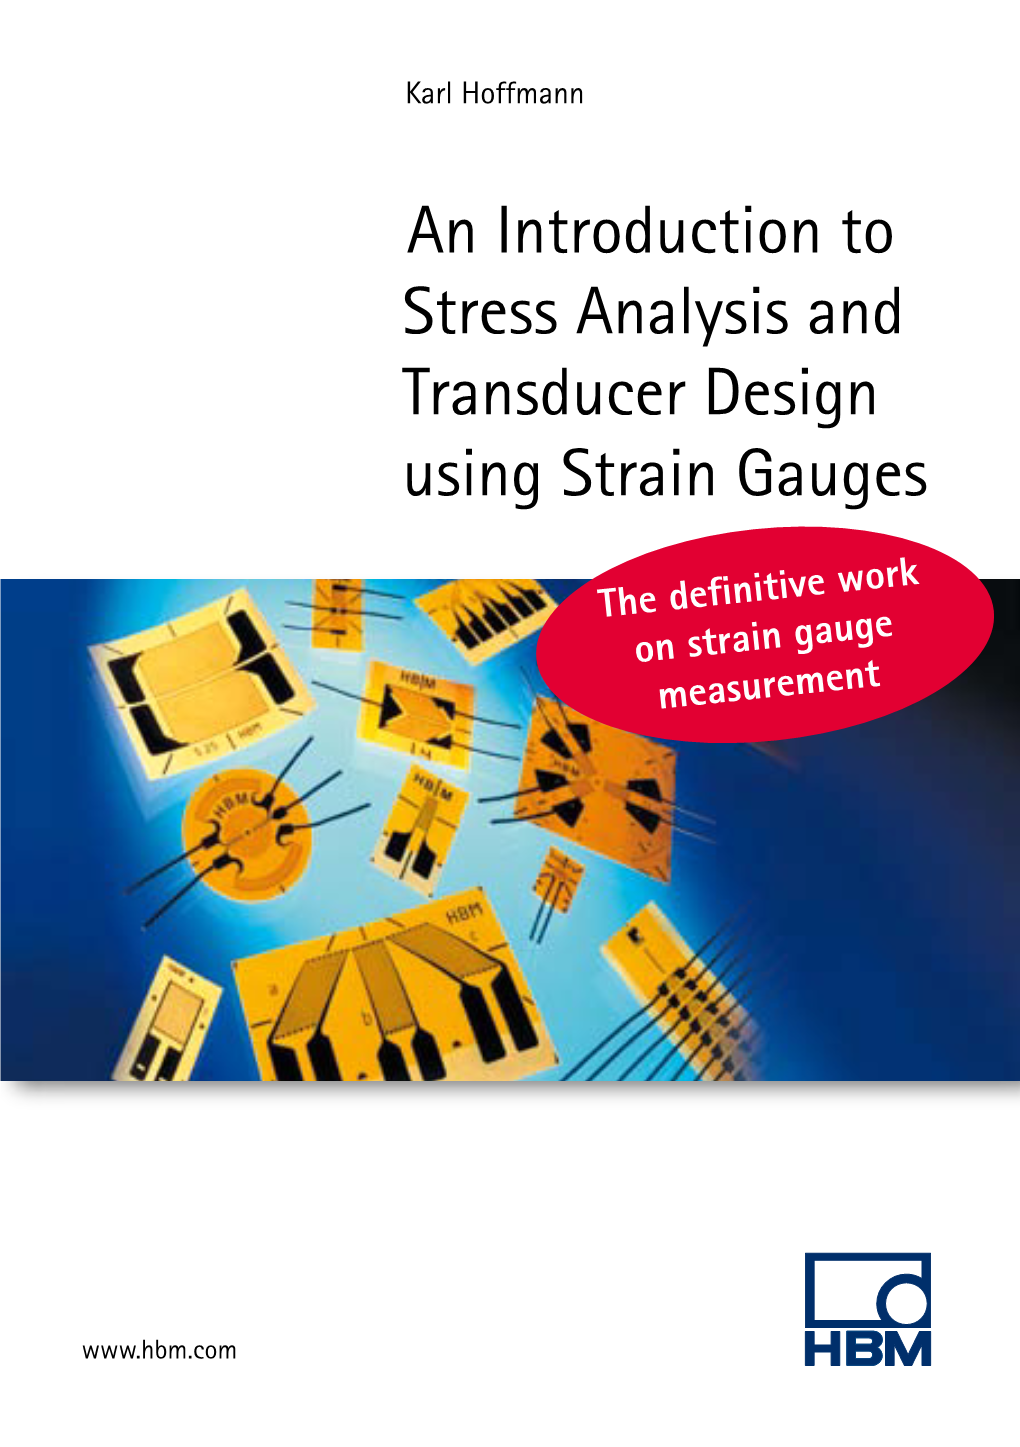 An Introduction to Stress Analysis and Transducer Design Using Strain Gauges